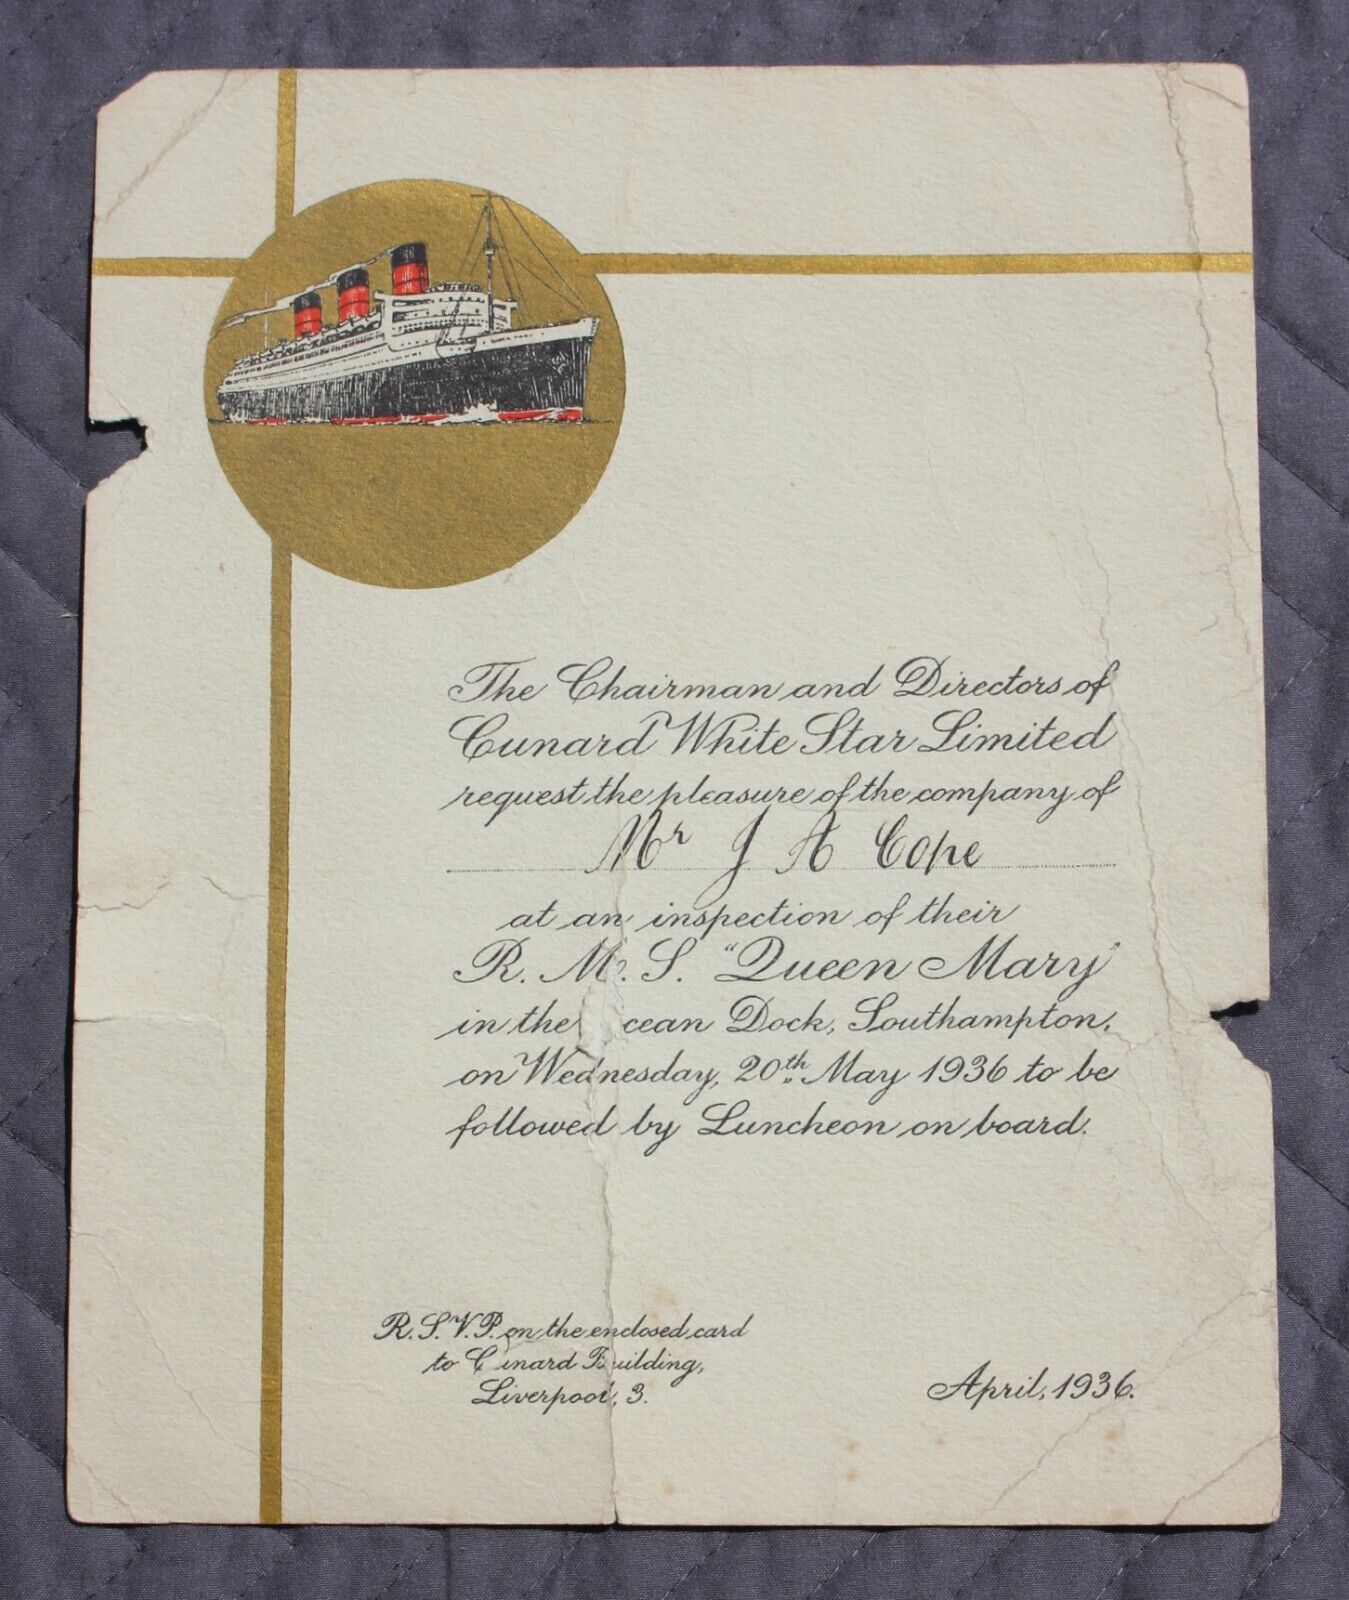 CUNARD WHITE STAR LINE RMS QUEEN MARY PRE MAIDEN VOYAGE INSPECTION INVITE A/F